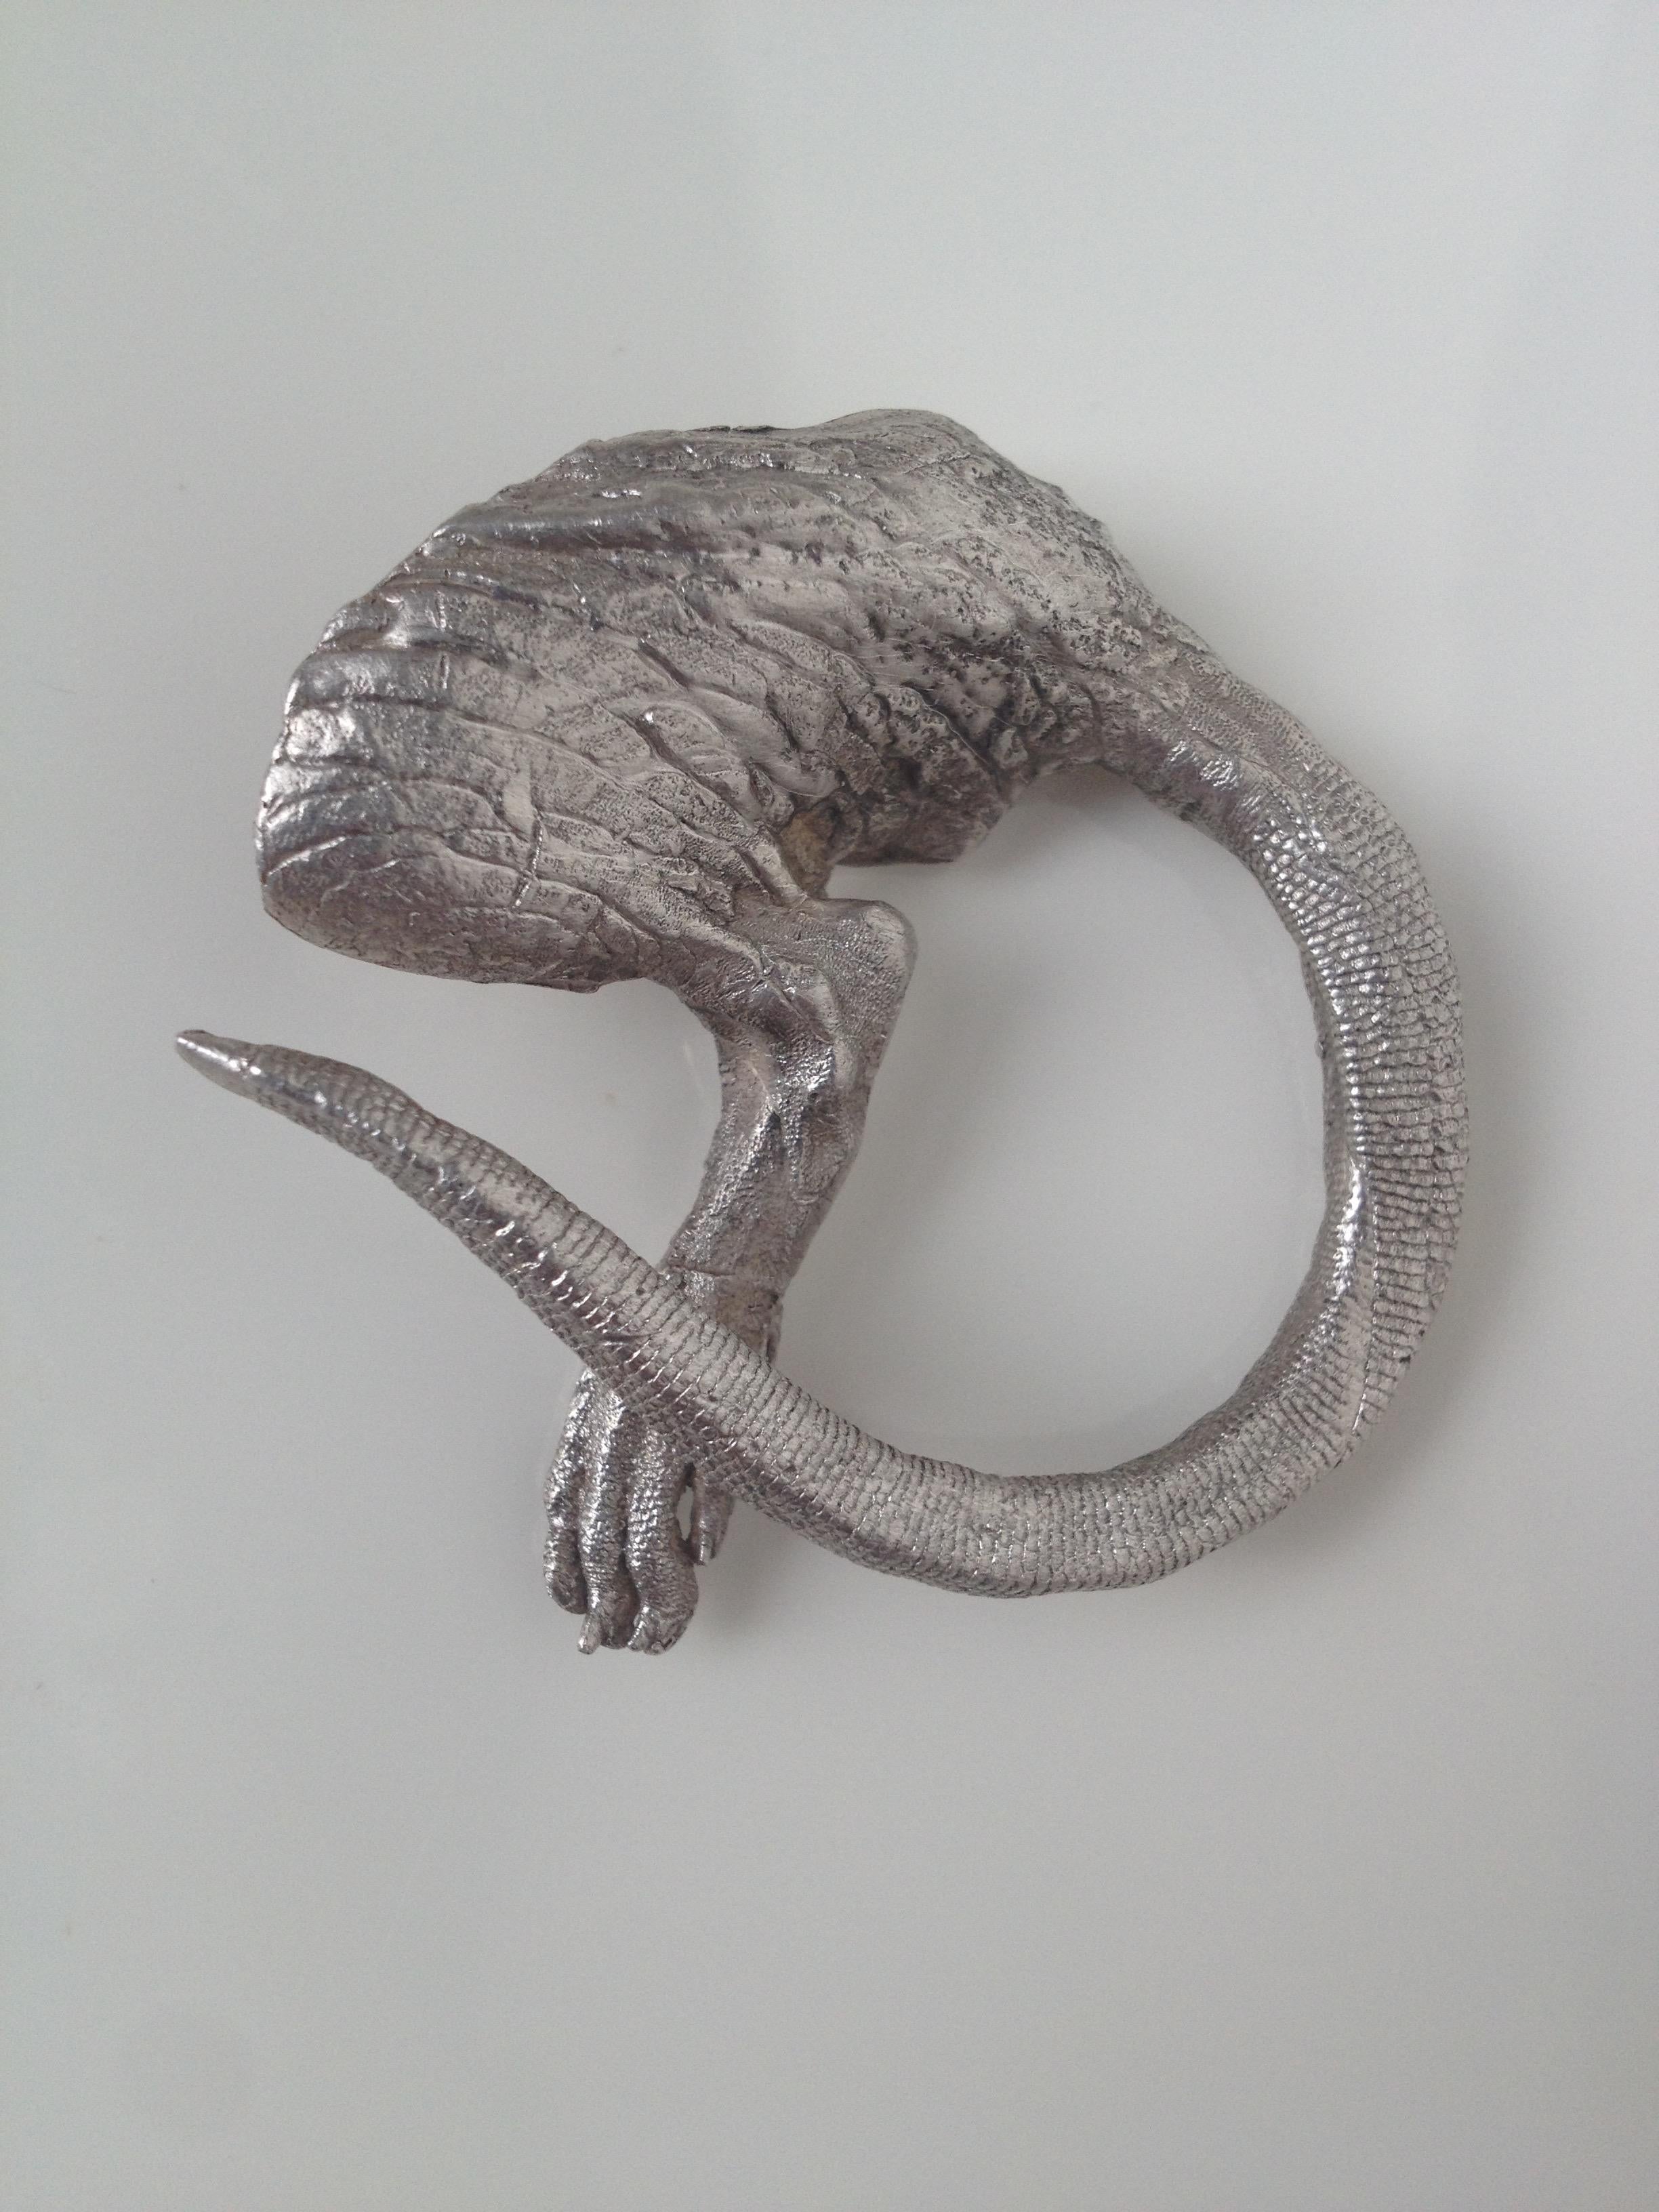 This rats ass wearable art jewellery design originates from a ten year sculptural exploration of our fellow mammal, the rat. Cast from the actual anatomy of this species, this original brooch is a creative salute to a fascinating species. An